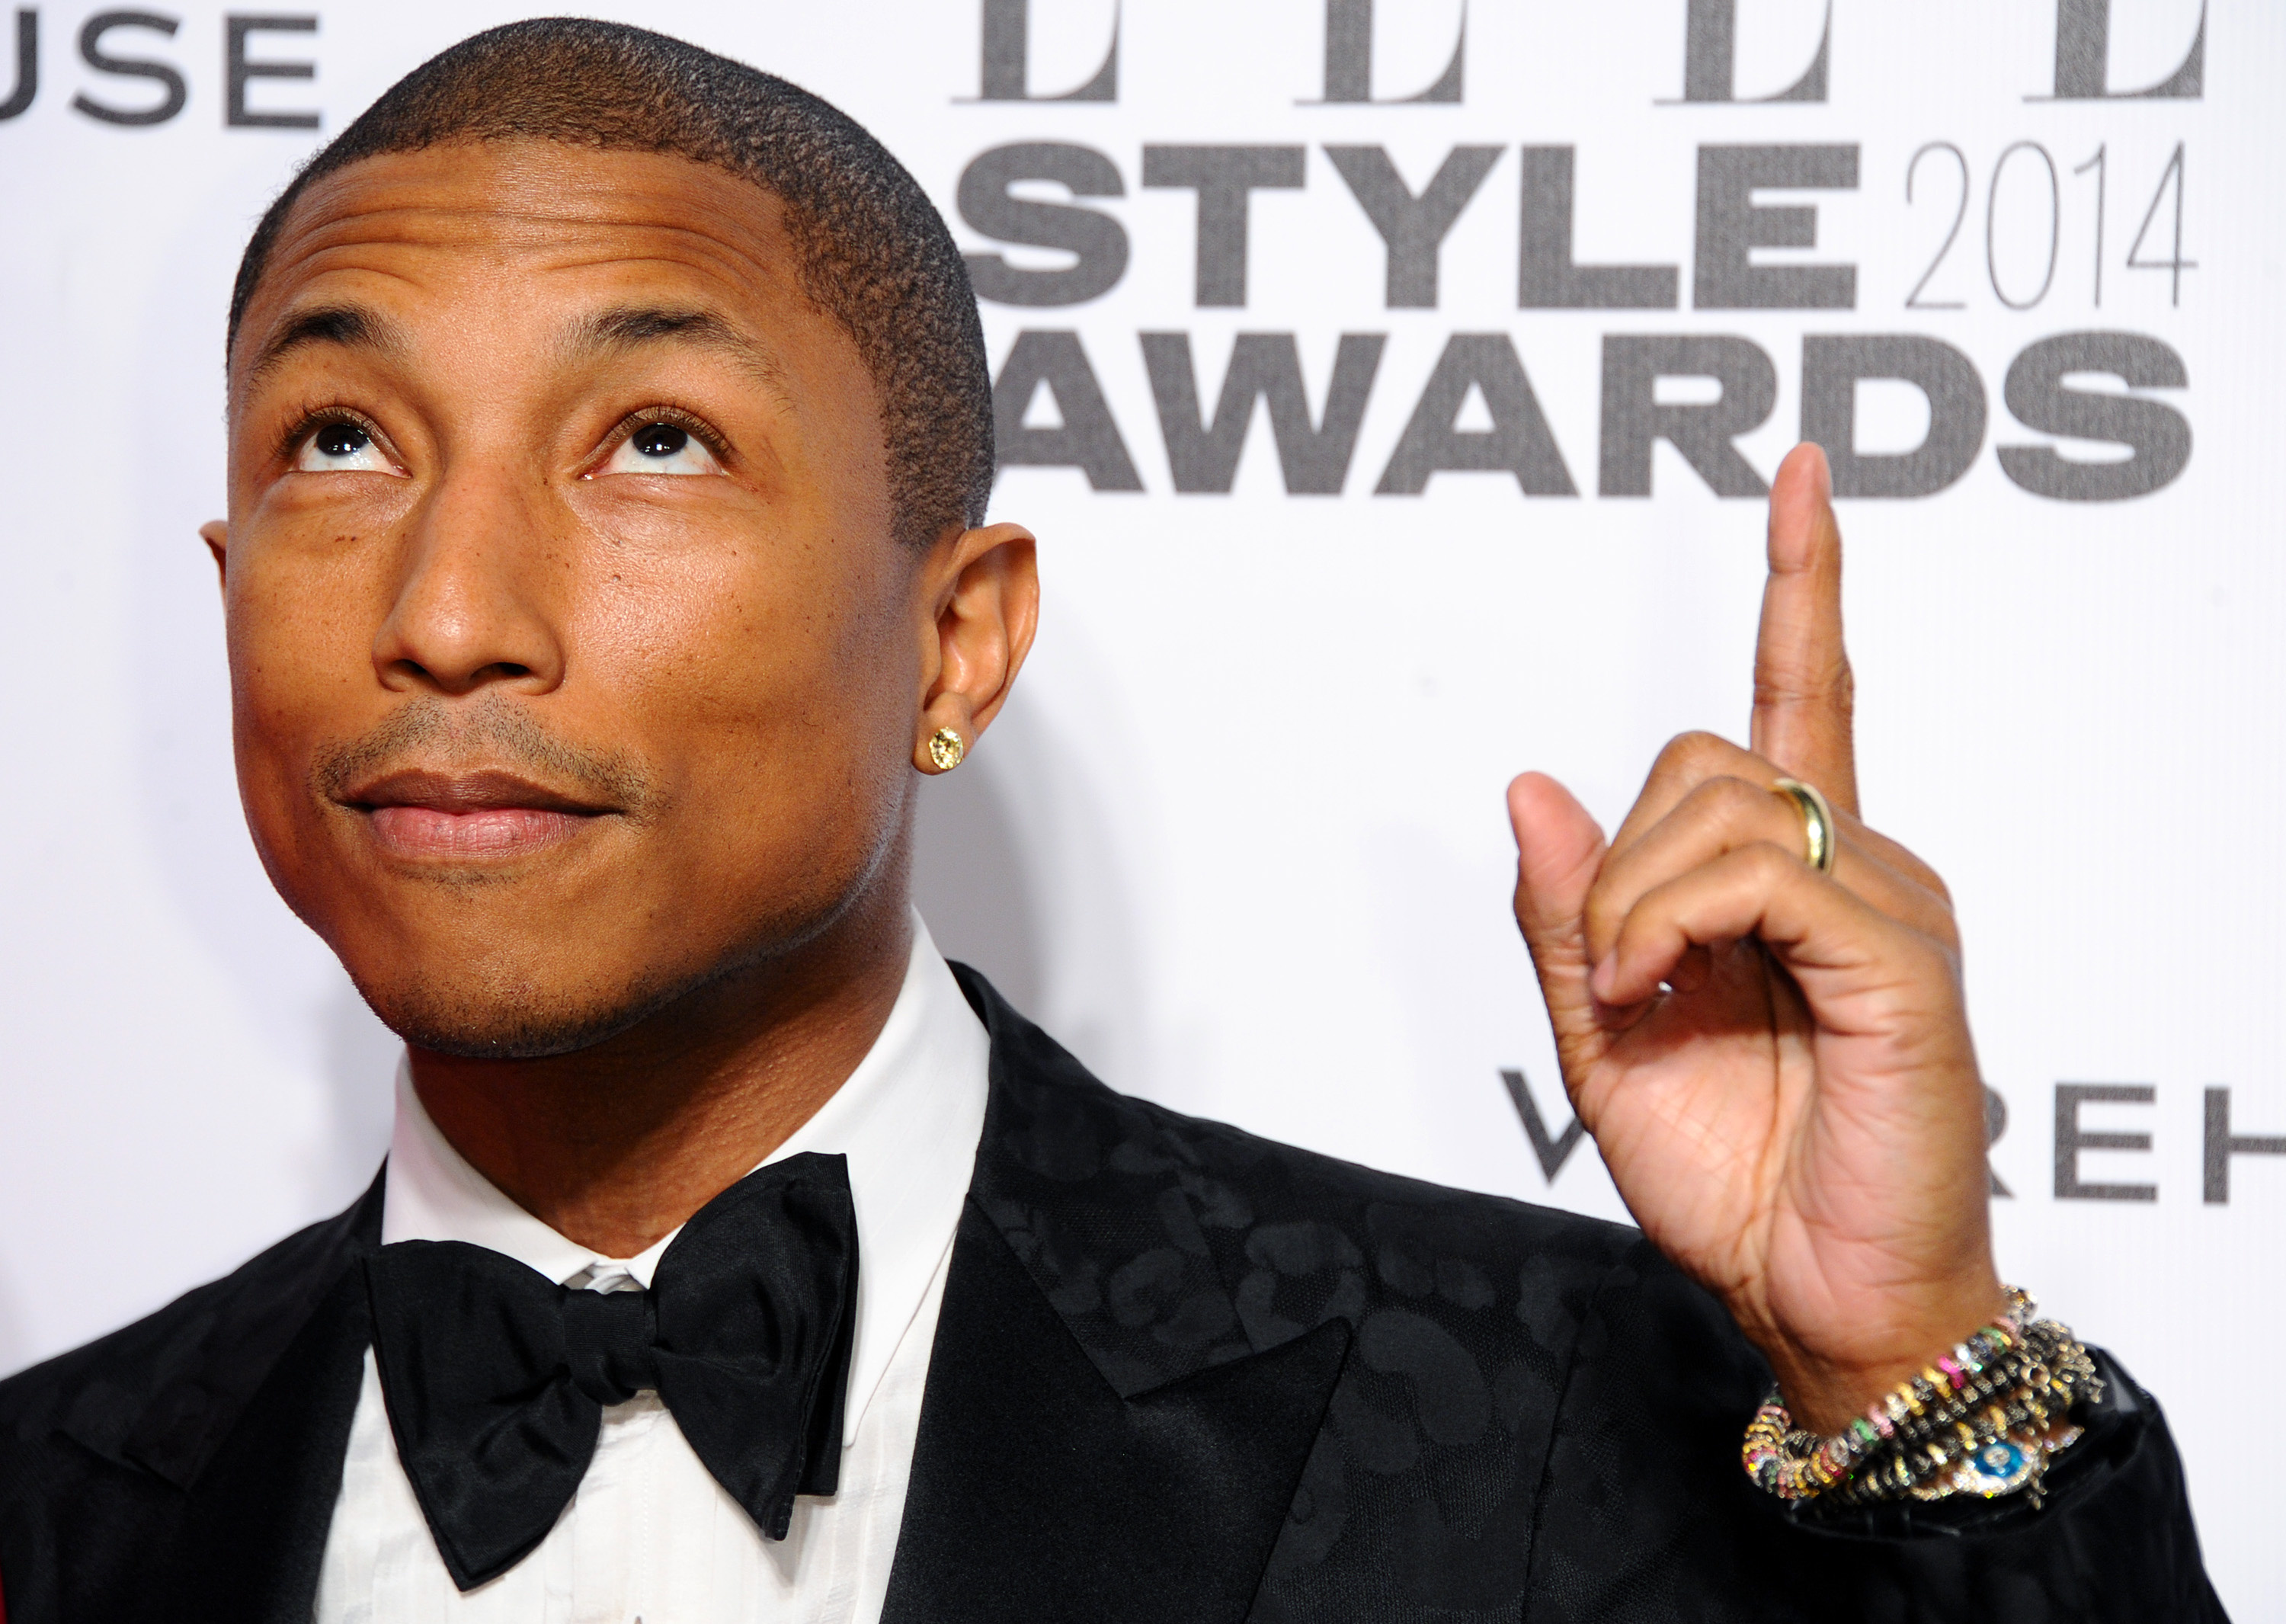 HD wallpaper, Desktop Hd Pharrell Williams Background, Approved Fashion Icon, Pharrell Williams, C Fda Approved, Totes Deserves This, 3000X2140 Hd Desktop